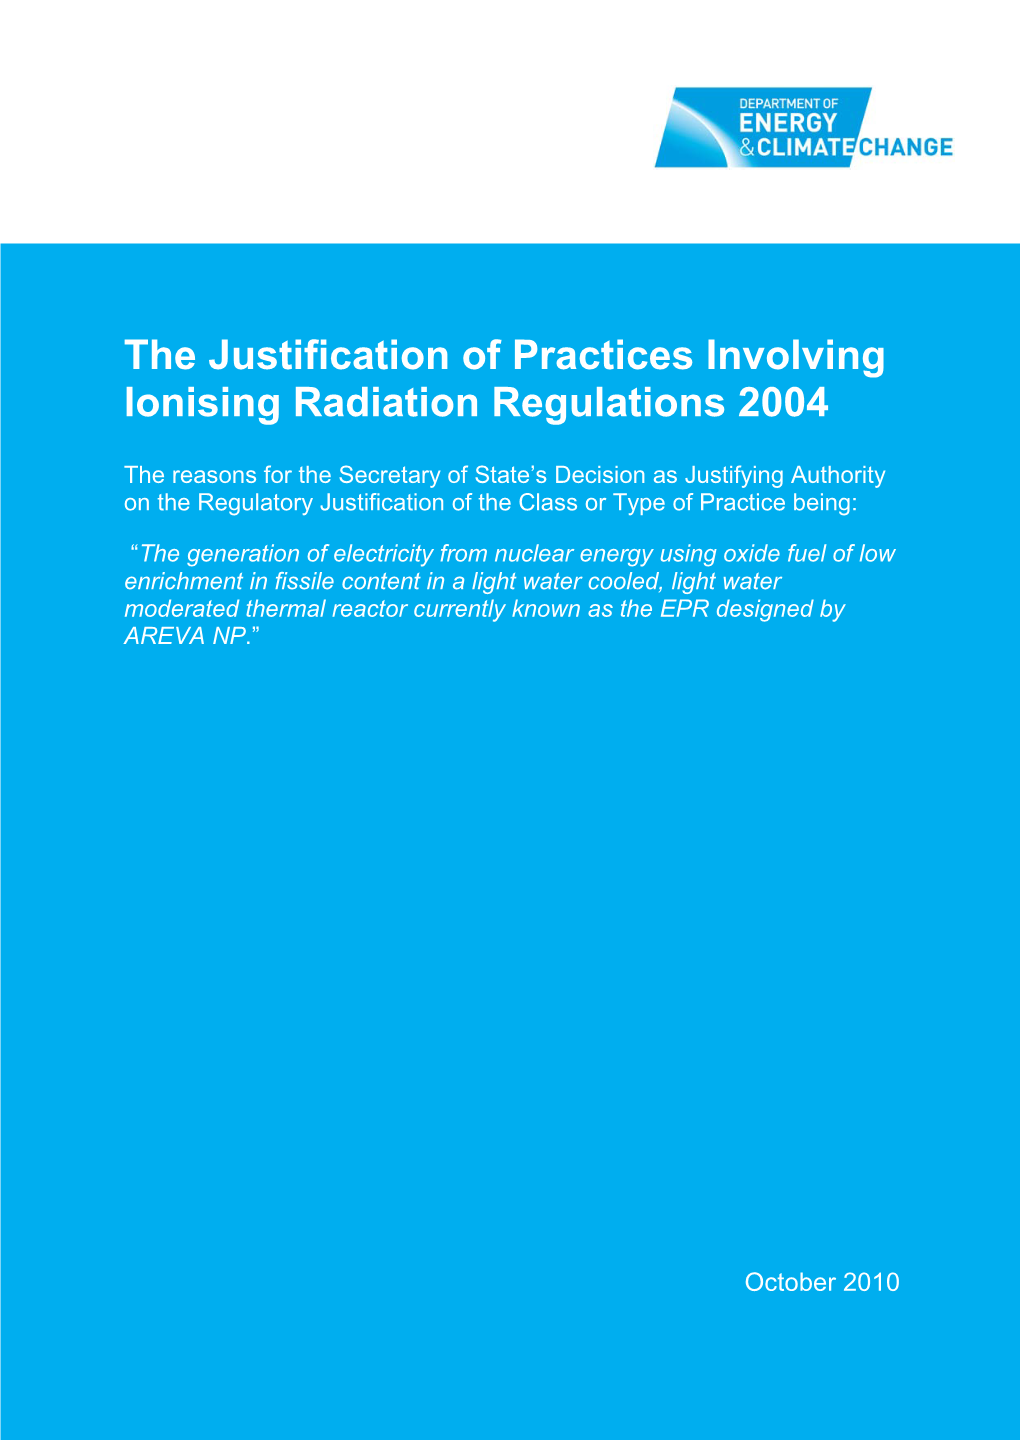 Regulatory Justification Decision on Nuclear Reactor: EPR